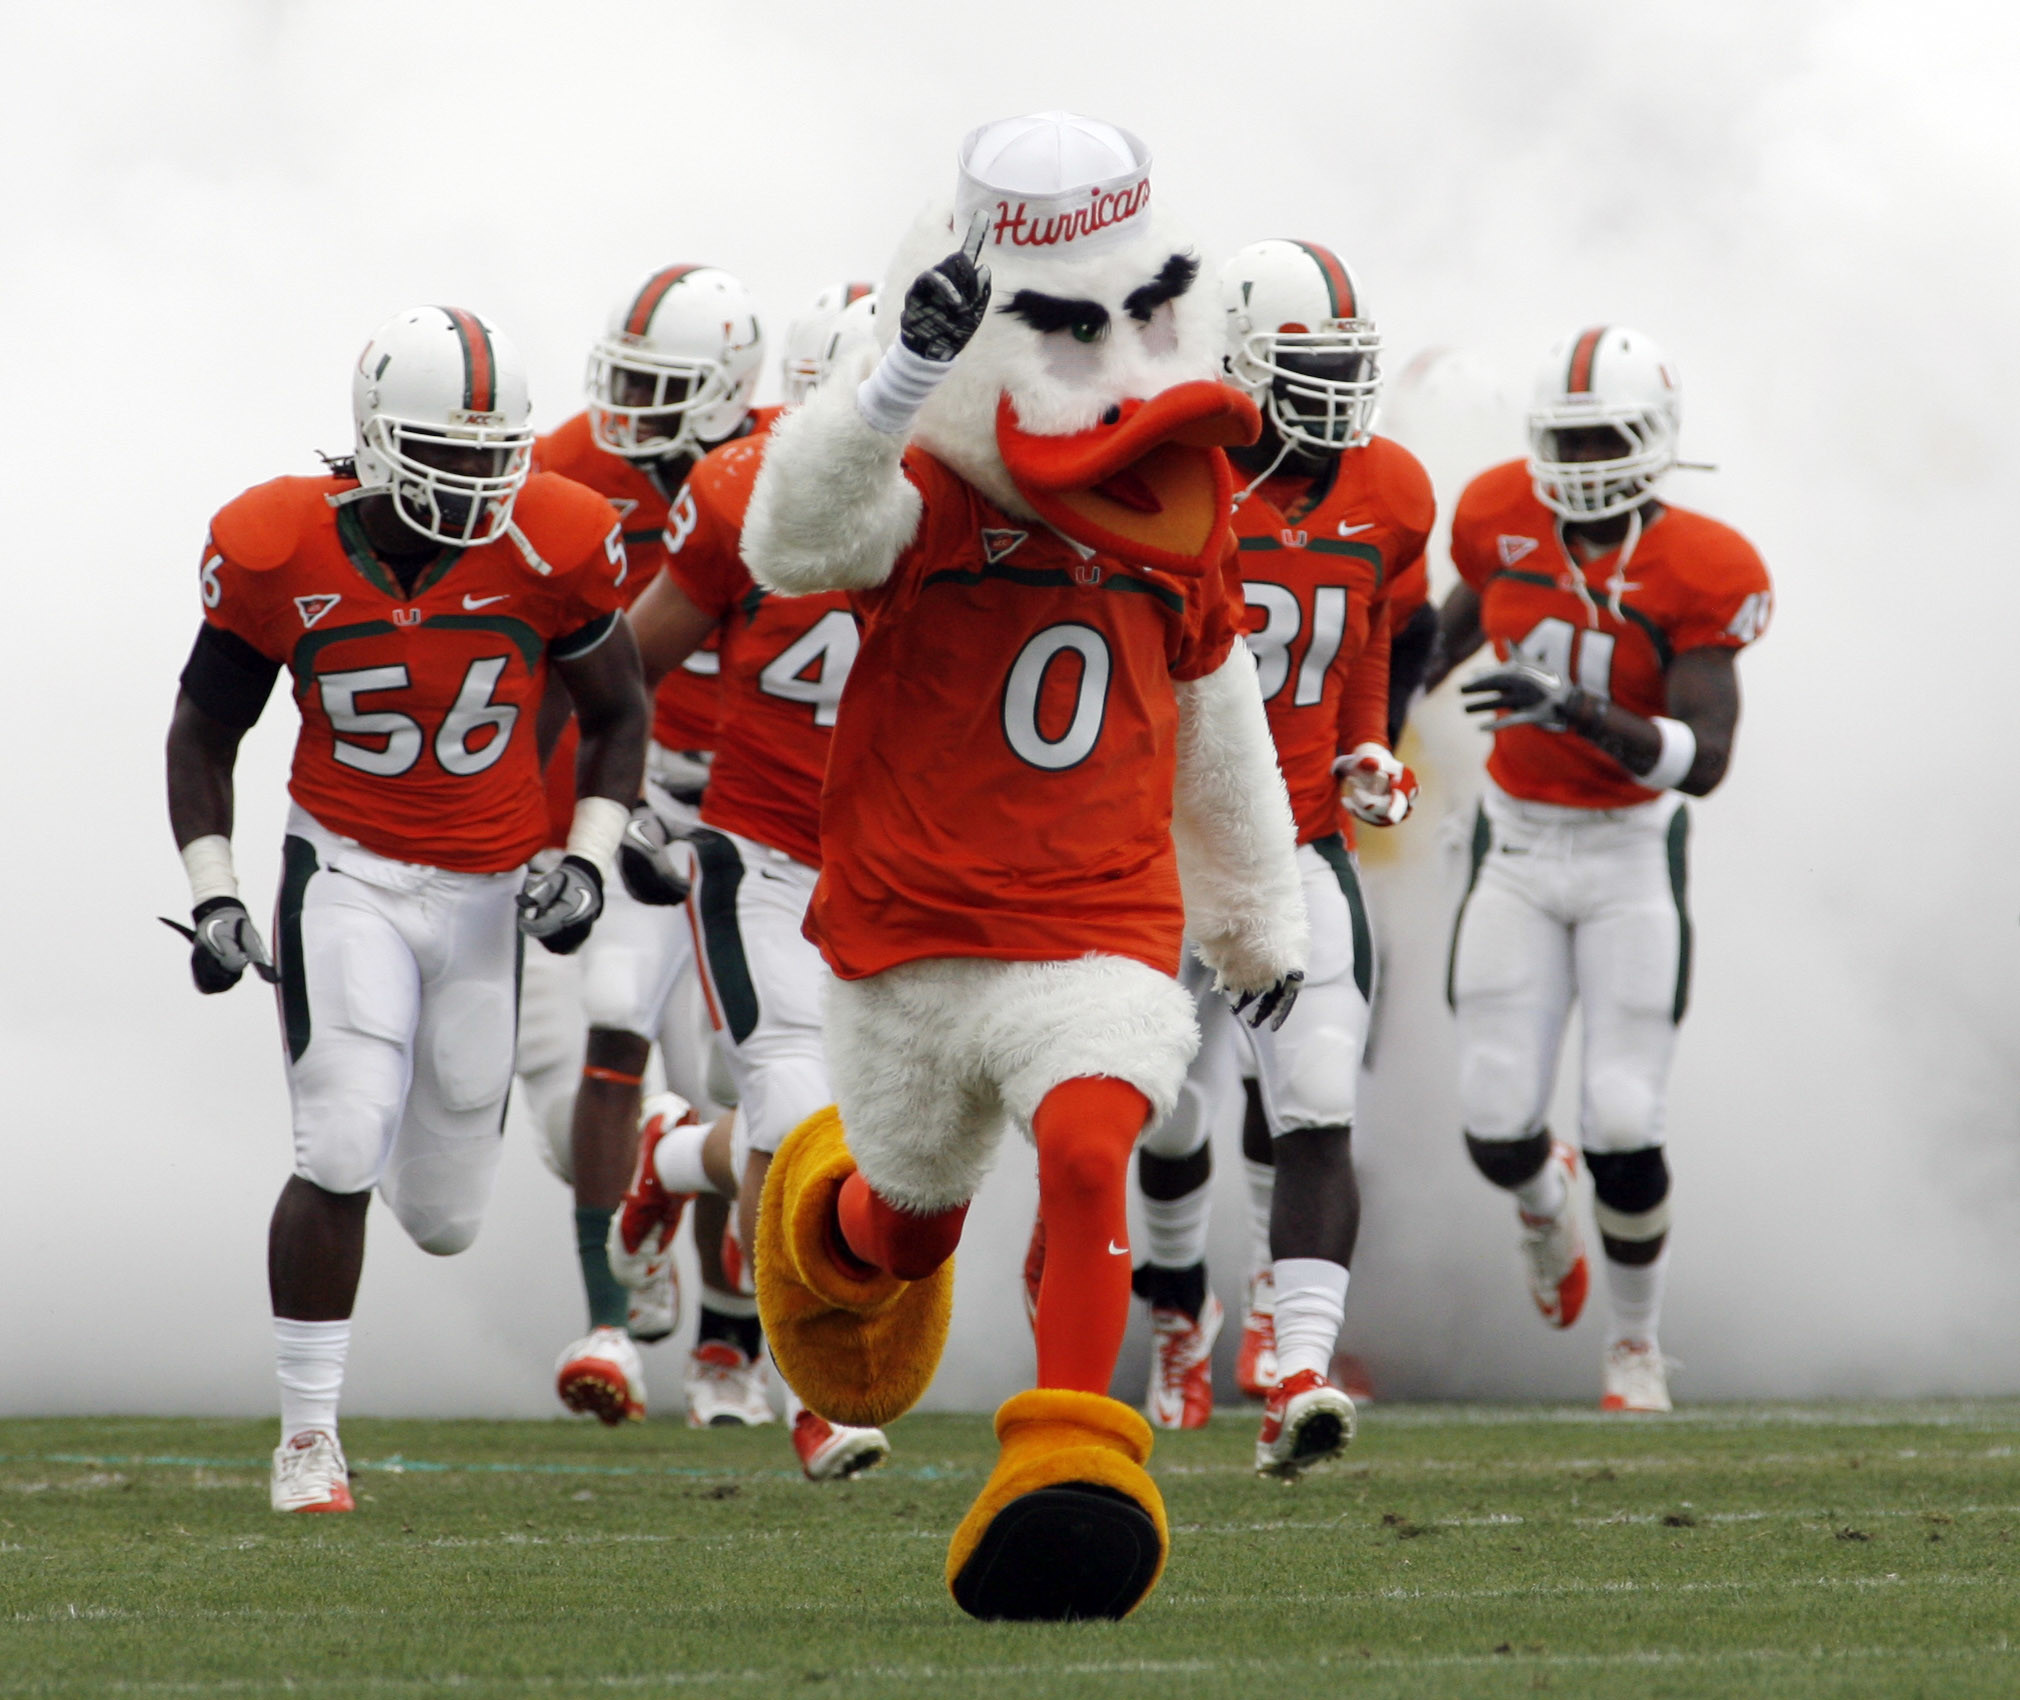 2020x1700 Miami's football team sat out the past two postseasons as self-imposed  punishment for NCAA